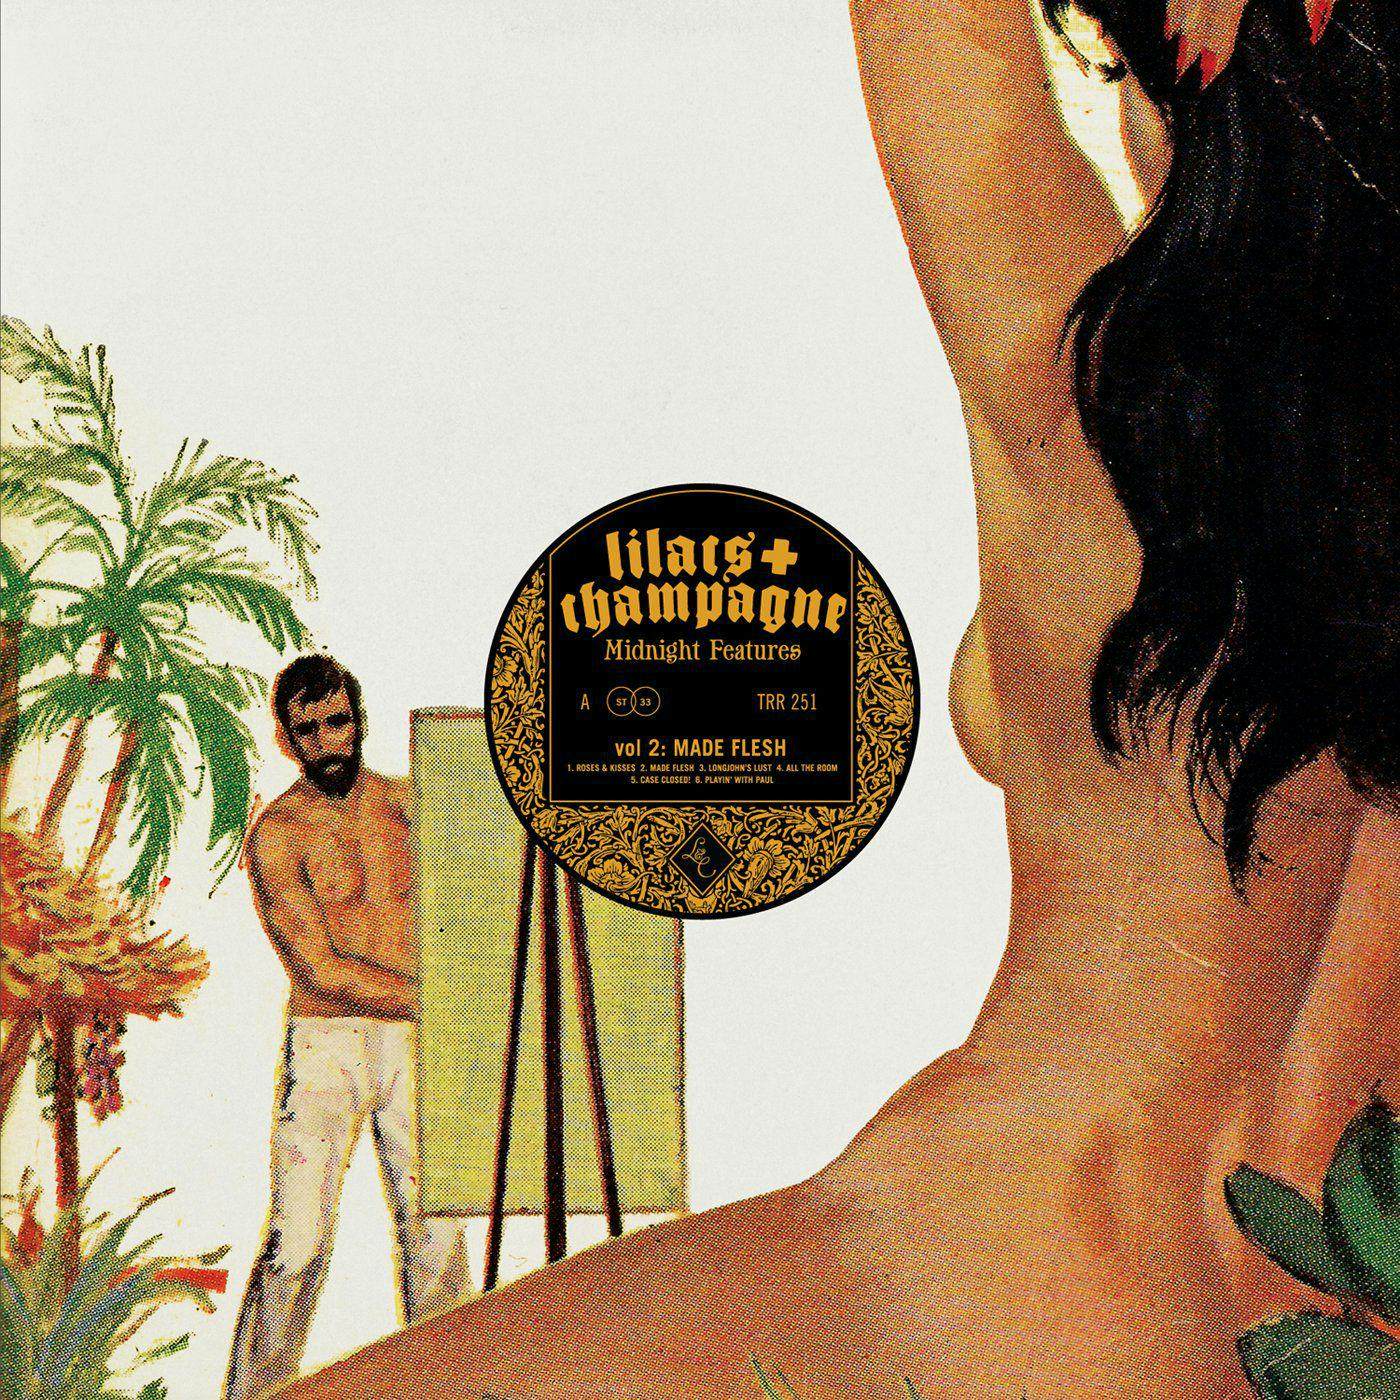 Lilacs & Champagne Midnight Features Vol.2: Made Flesh Vinyl Record